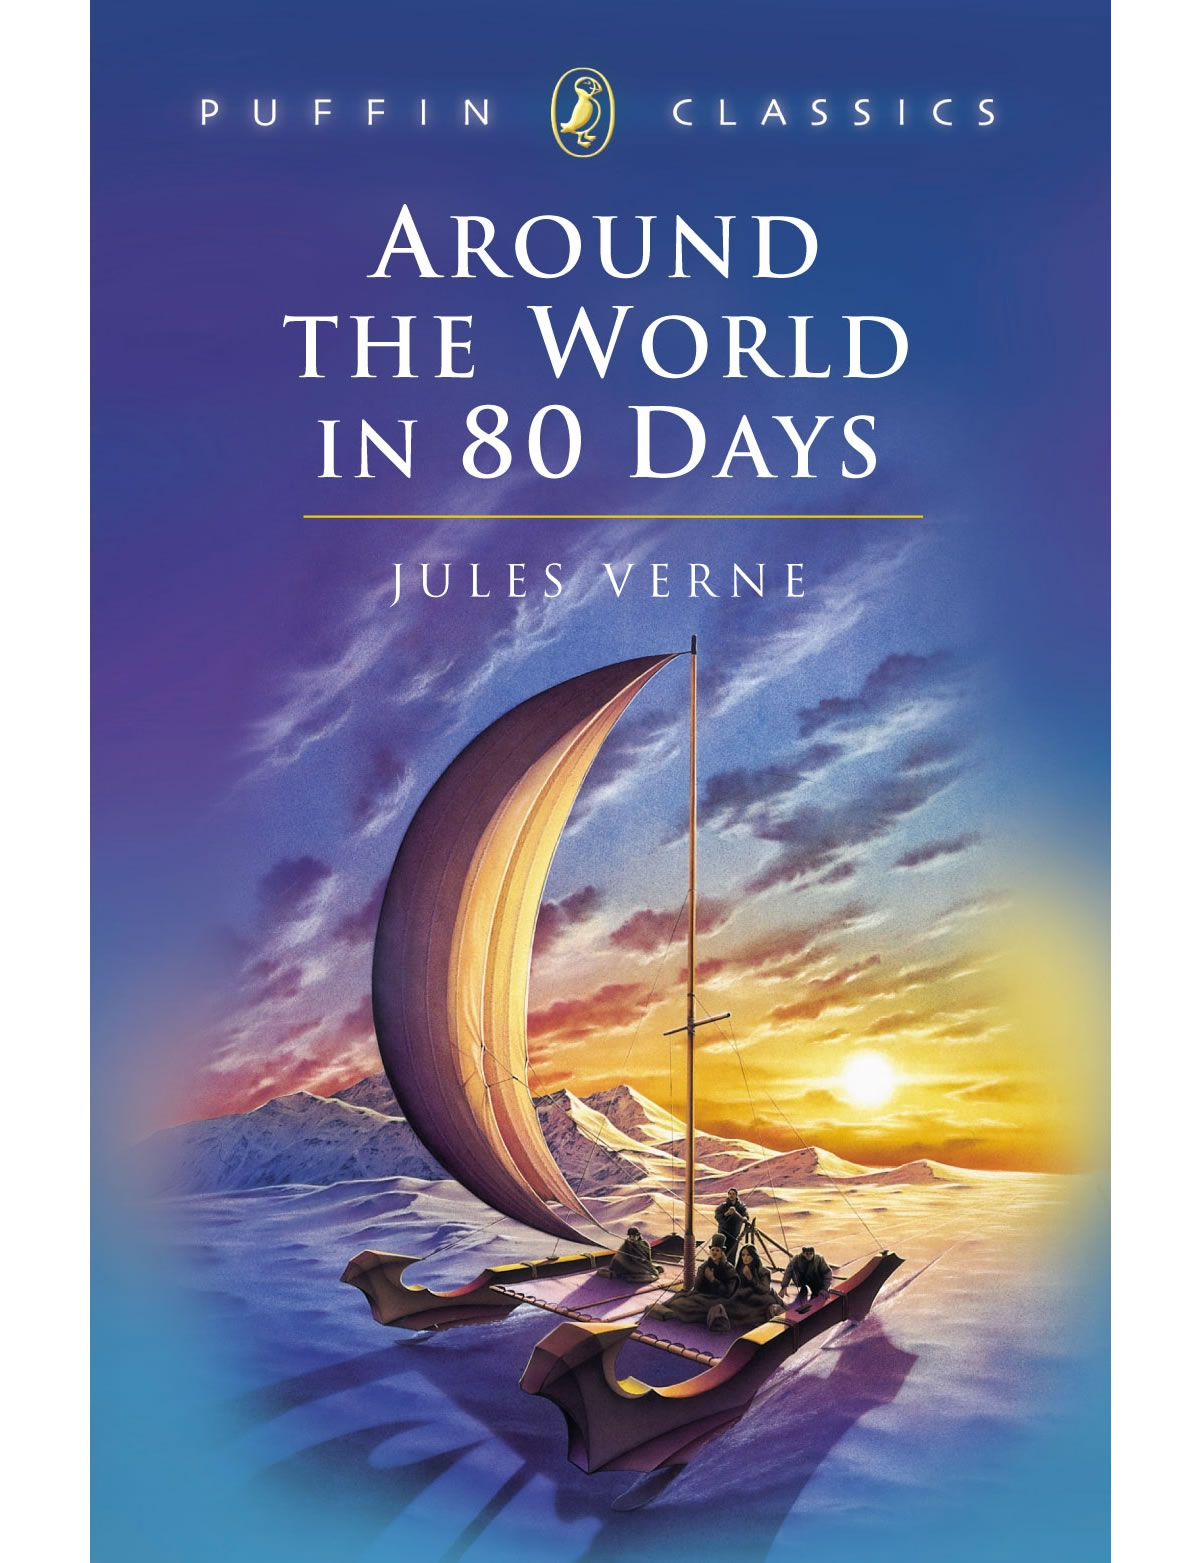 An original gap year! Around the World in Eighty Days by Jules Verne, Image courtesy of Penguin Random House